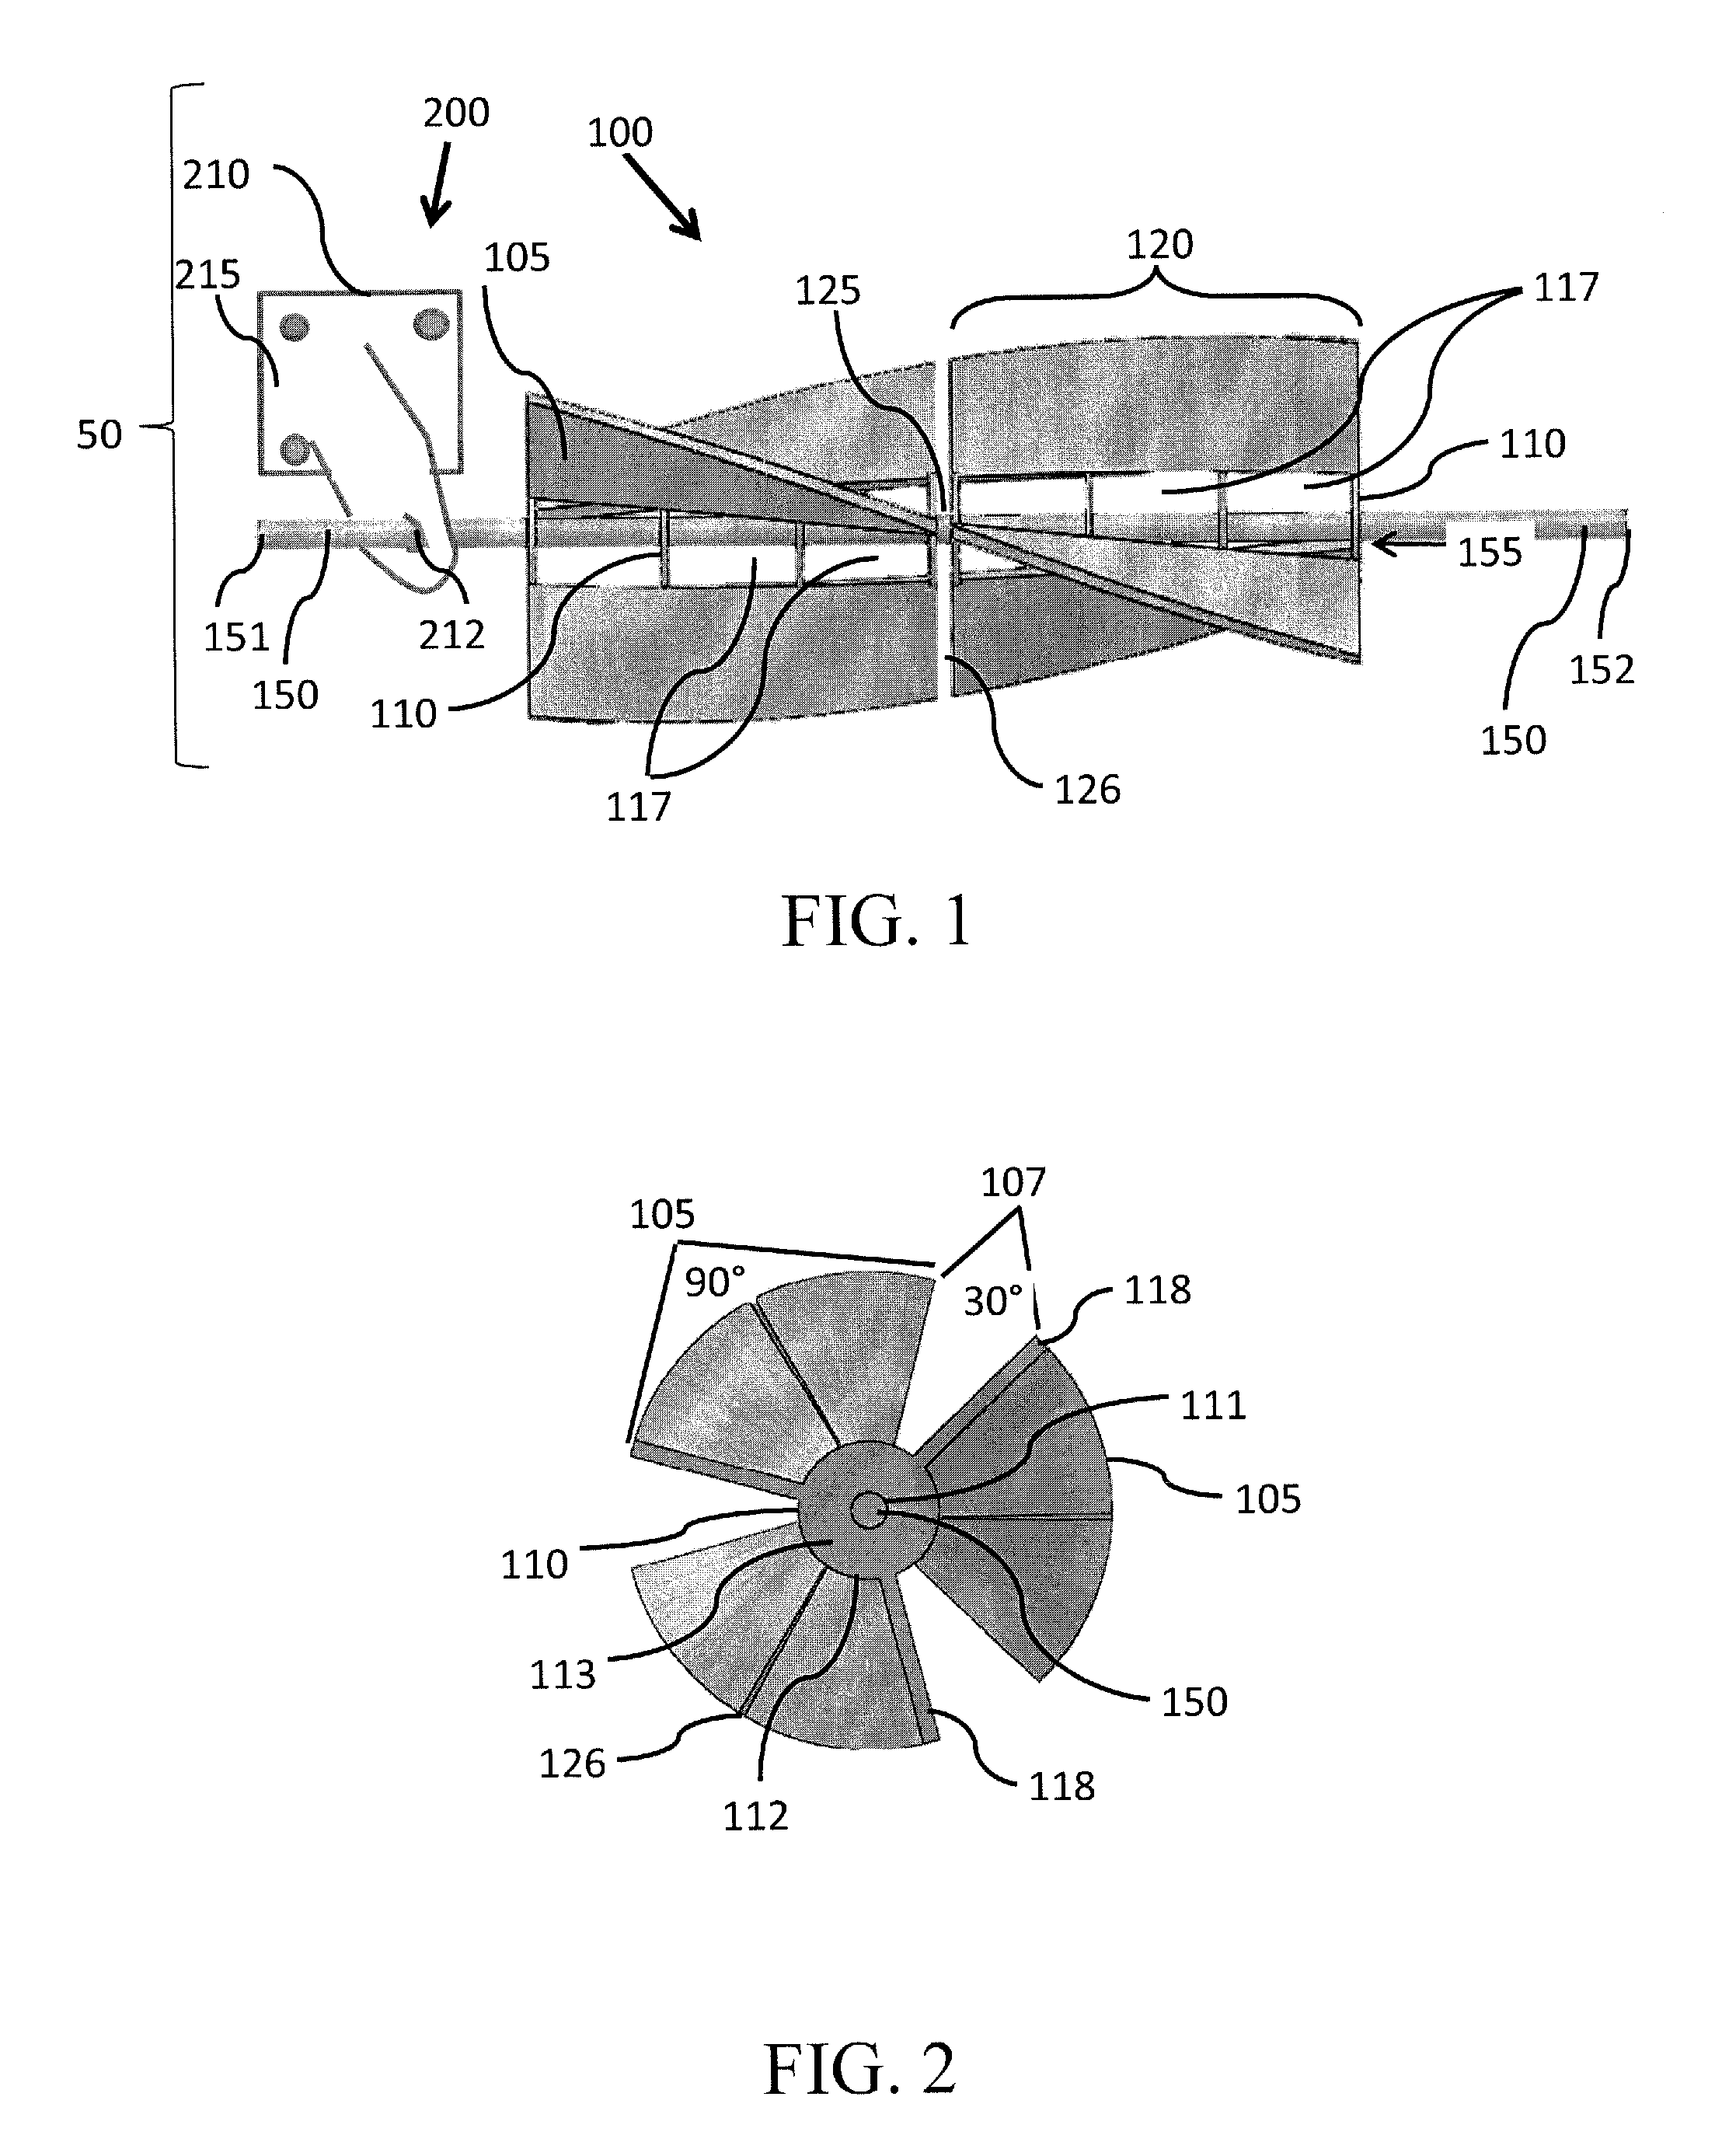 Active aerodynamics mitigation and power production system for buildings and other structures